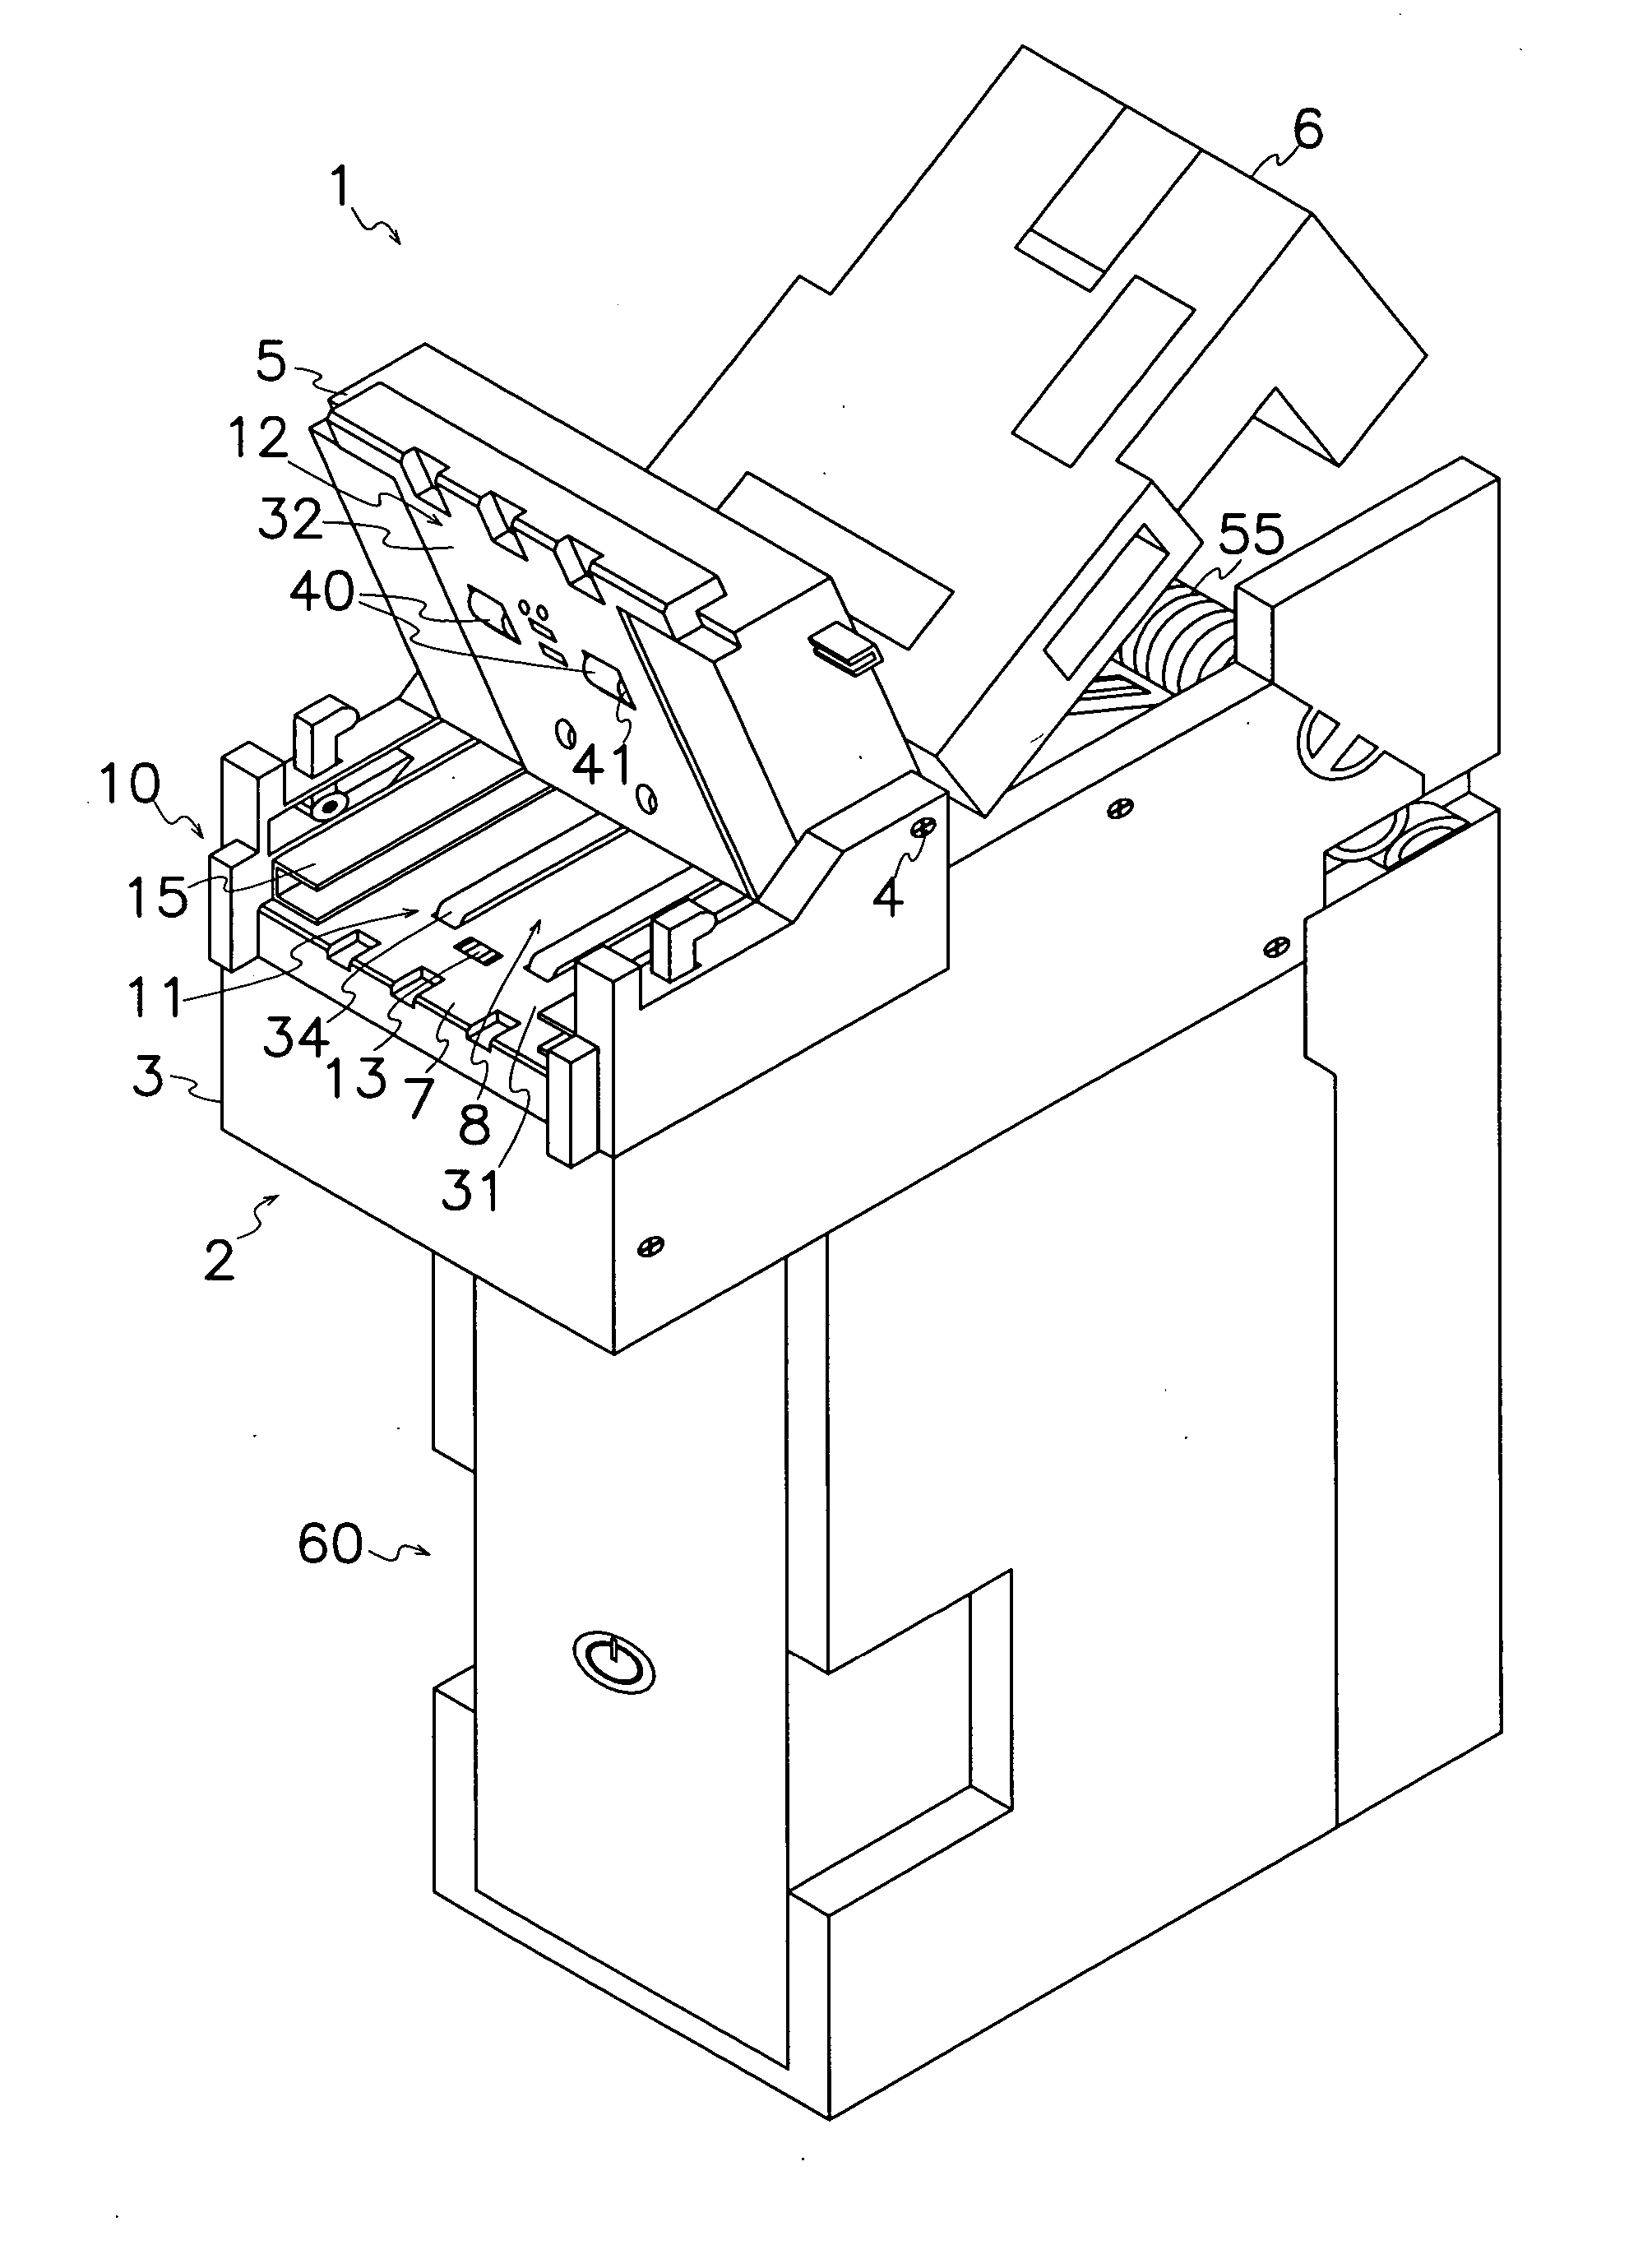 Apparatus for discriminating valuable papers with centering means